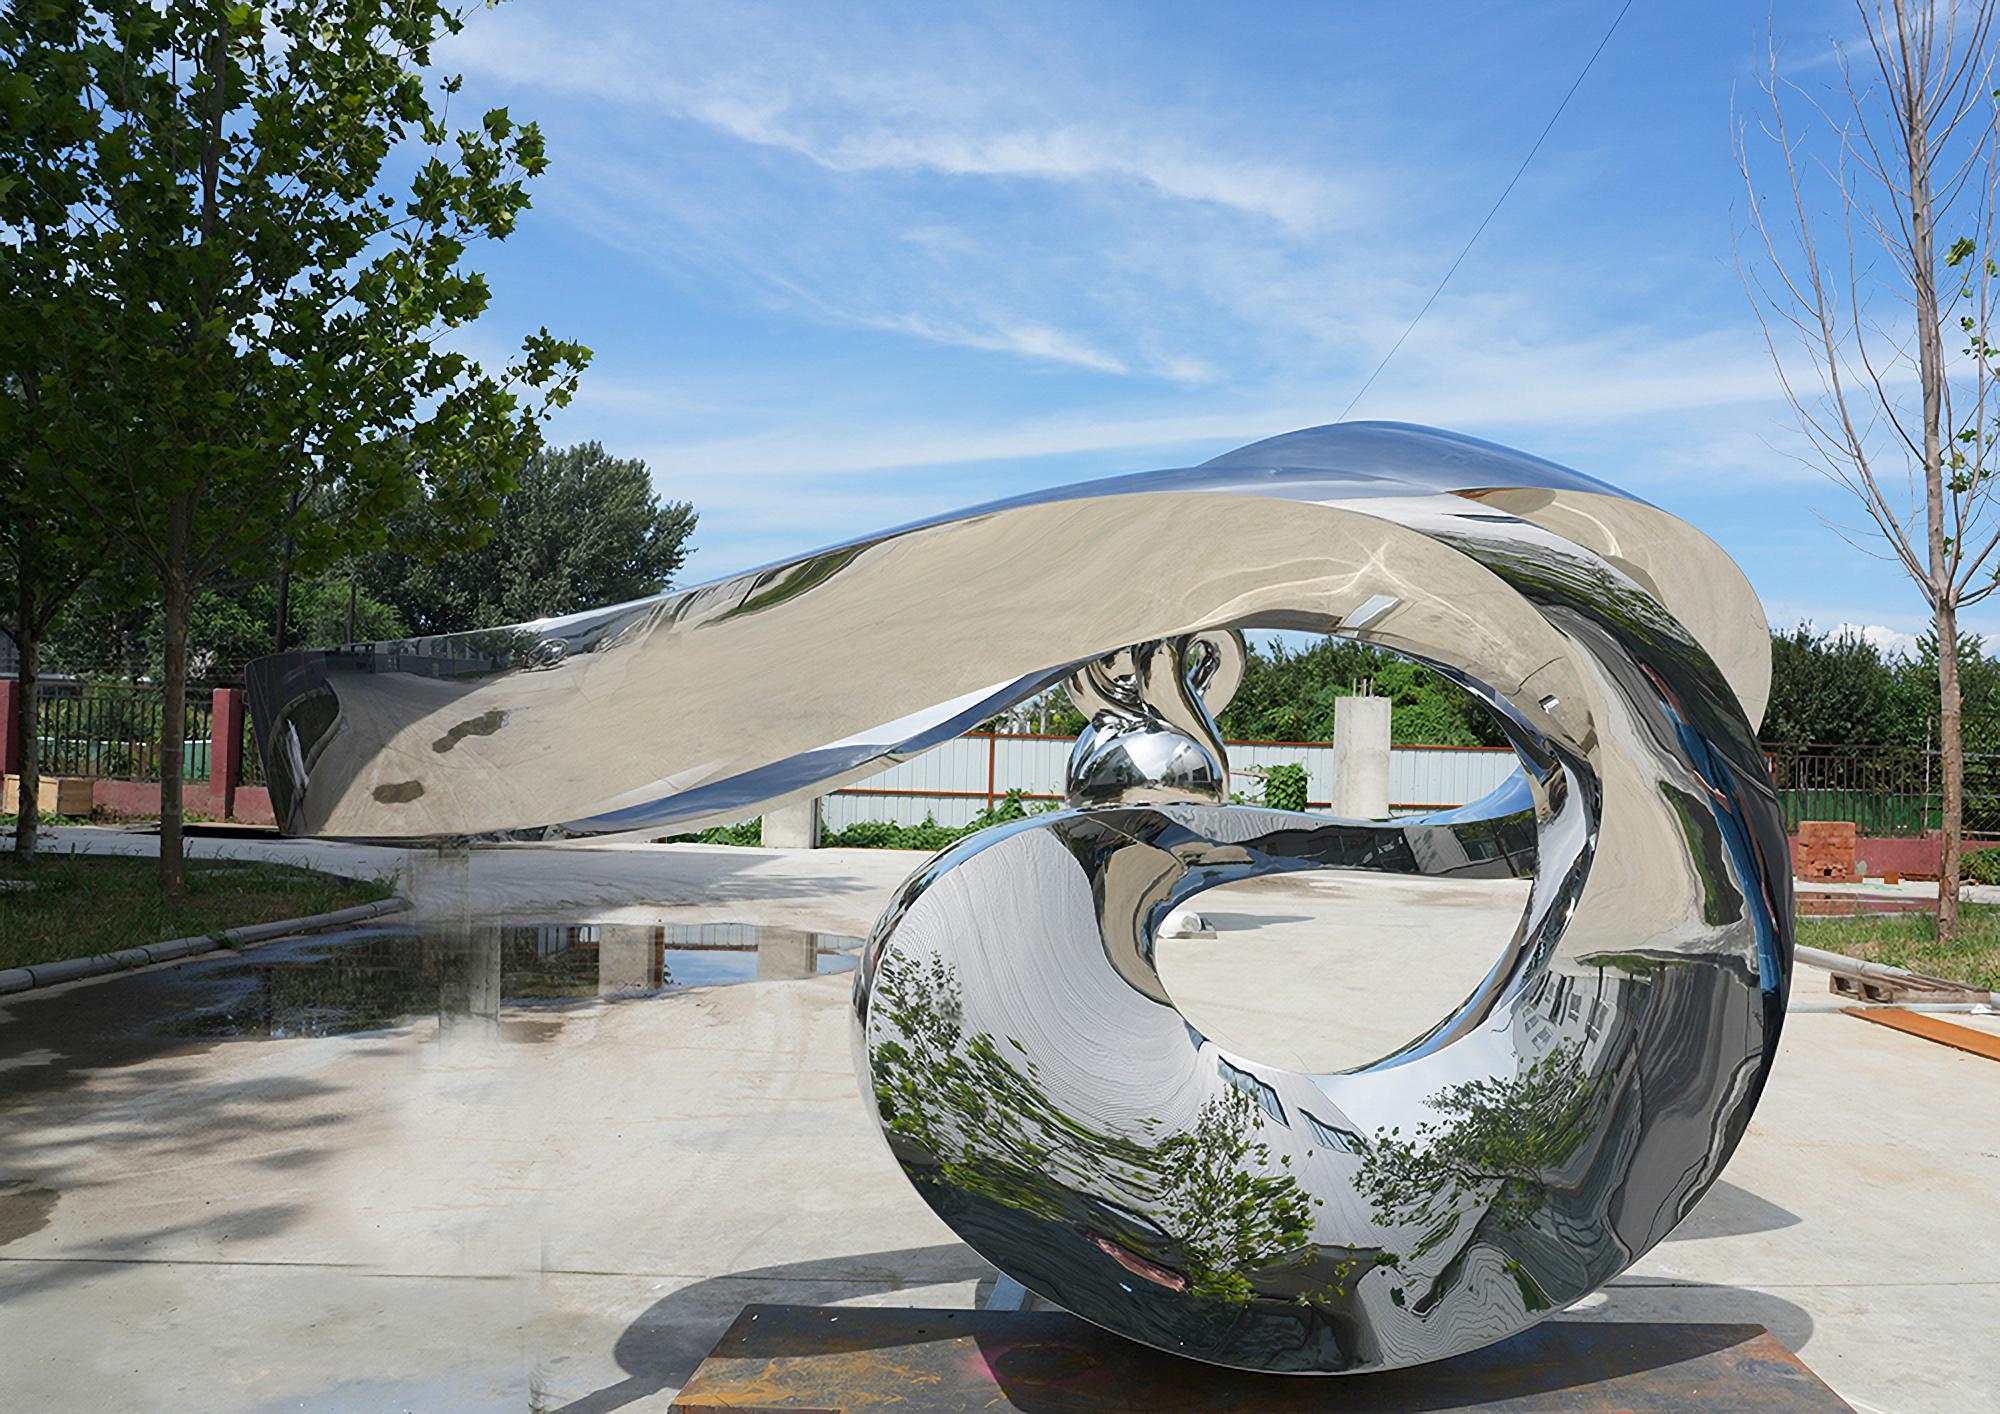 Zephyr 7ft SS 2/50 - large, abstract, polished stainless steel outdoor sculpture - Gray Abstract Sculpture by Jeremy Guy